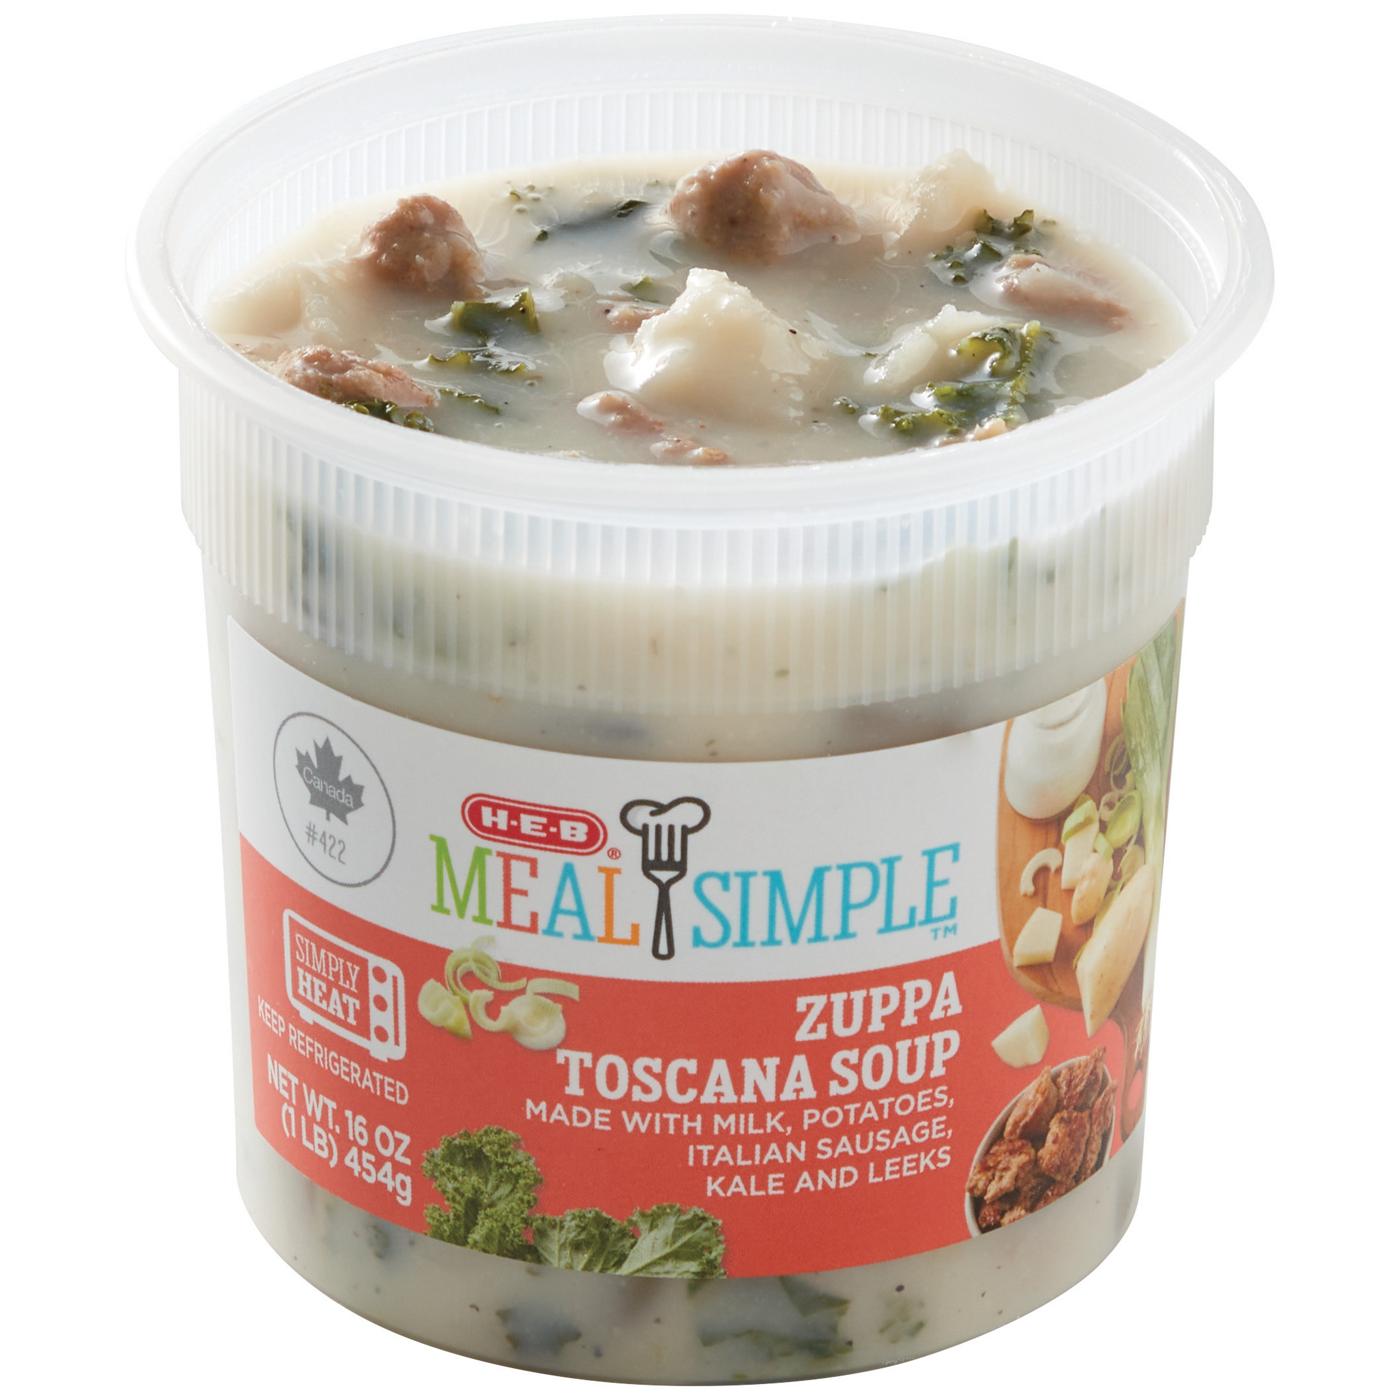 Meal Simple by H-E-B Zuppa Toscana Soup; image 1 of 2